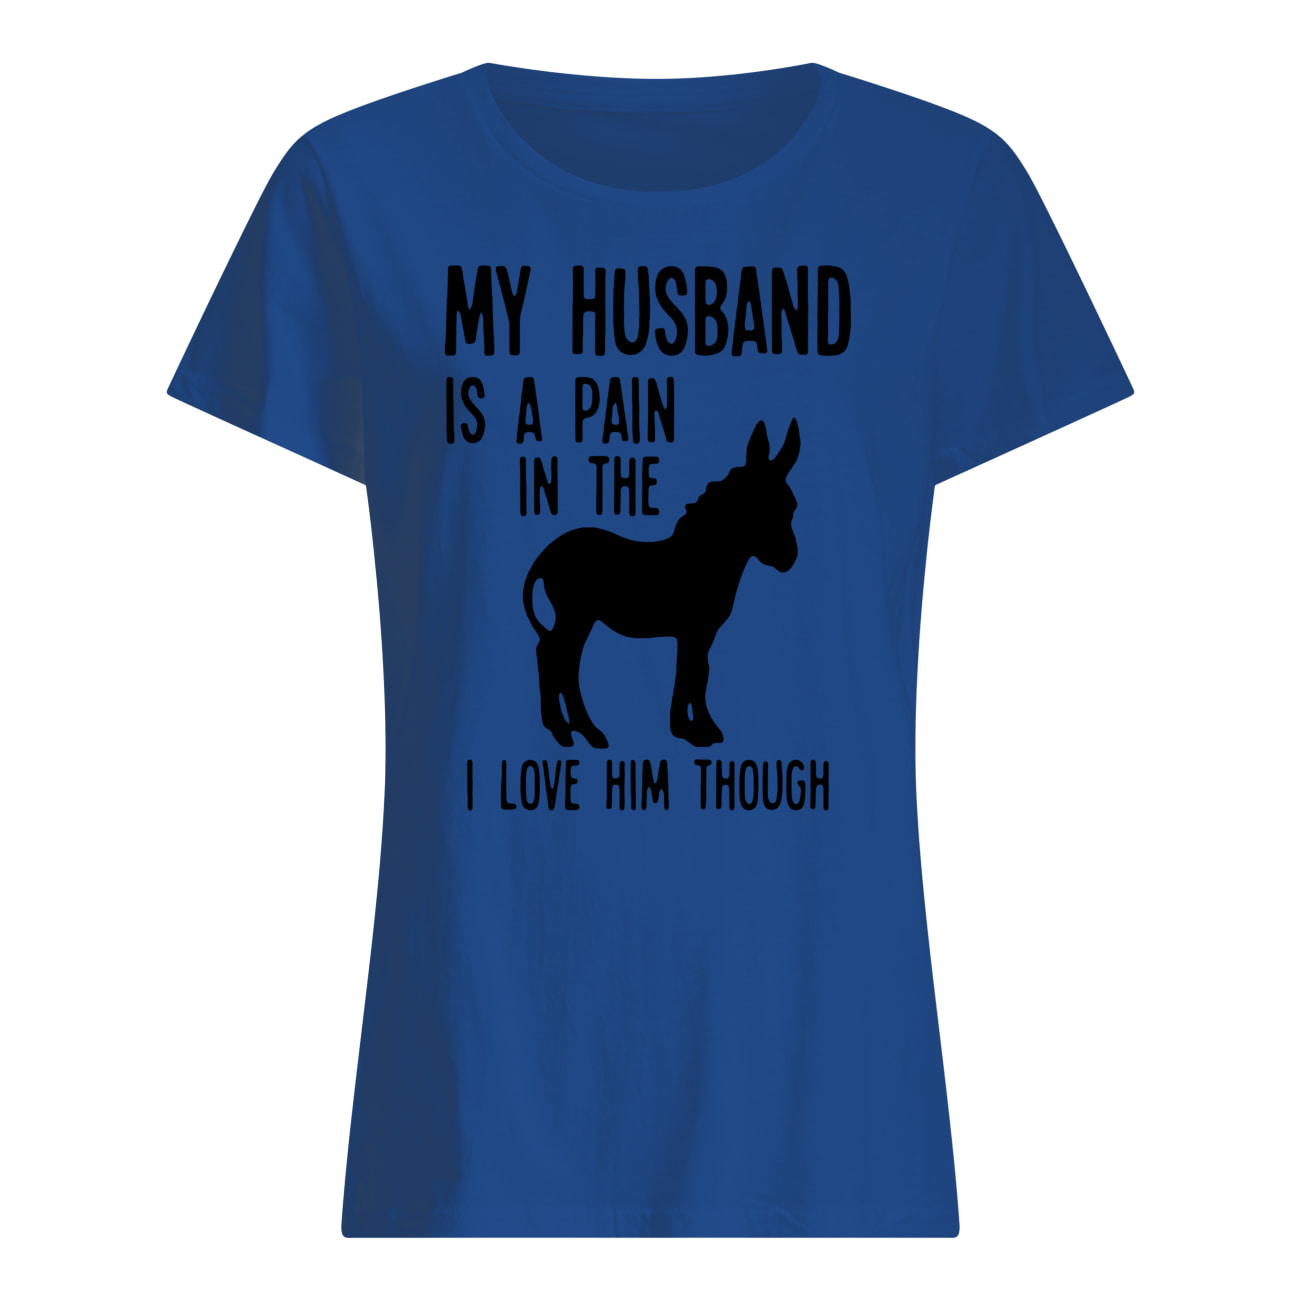 My husband is a pain in the donkey I love him though womens shirt